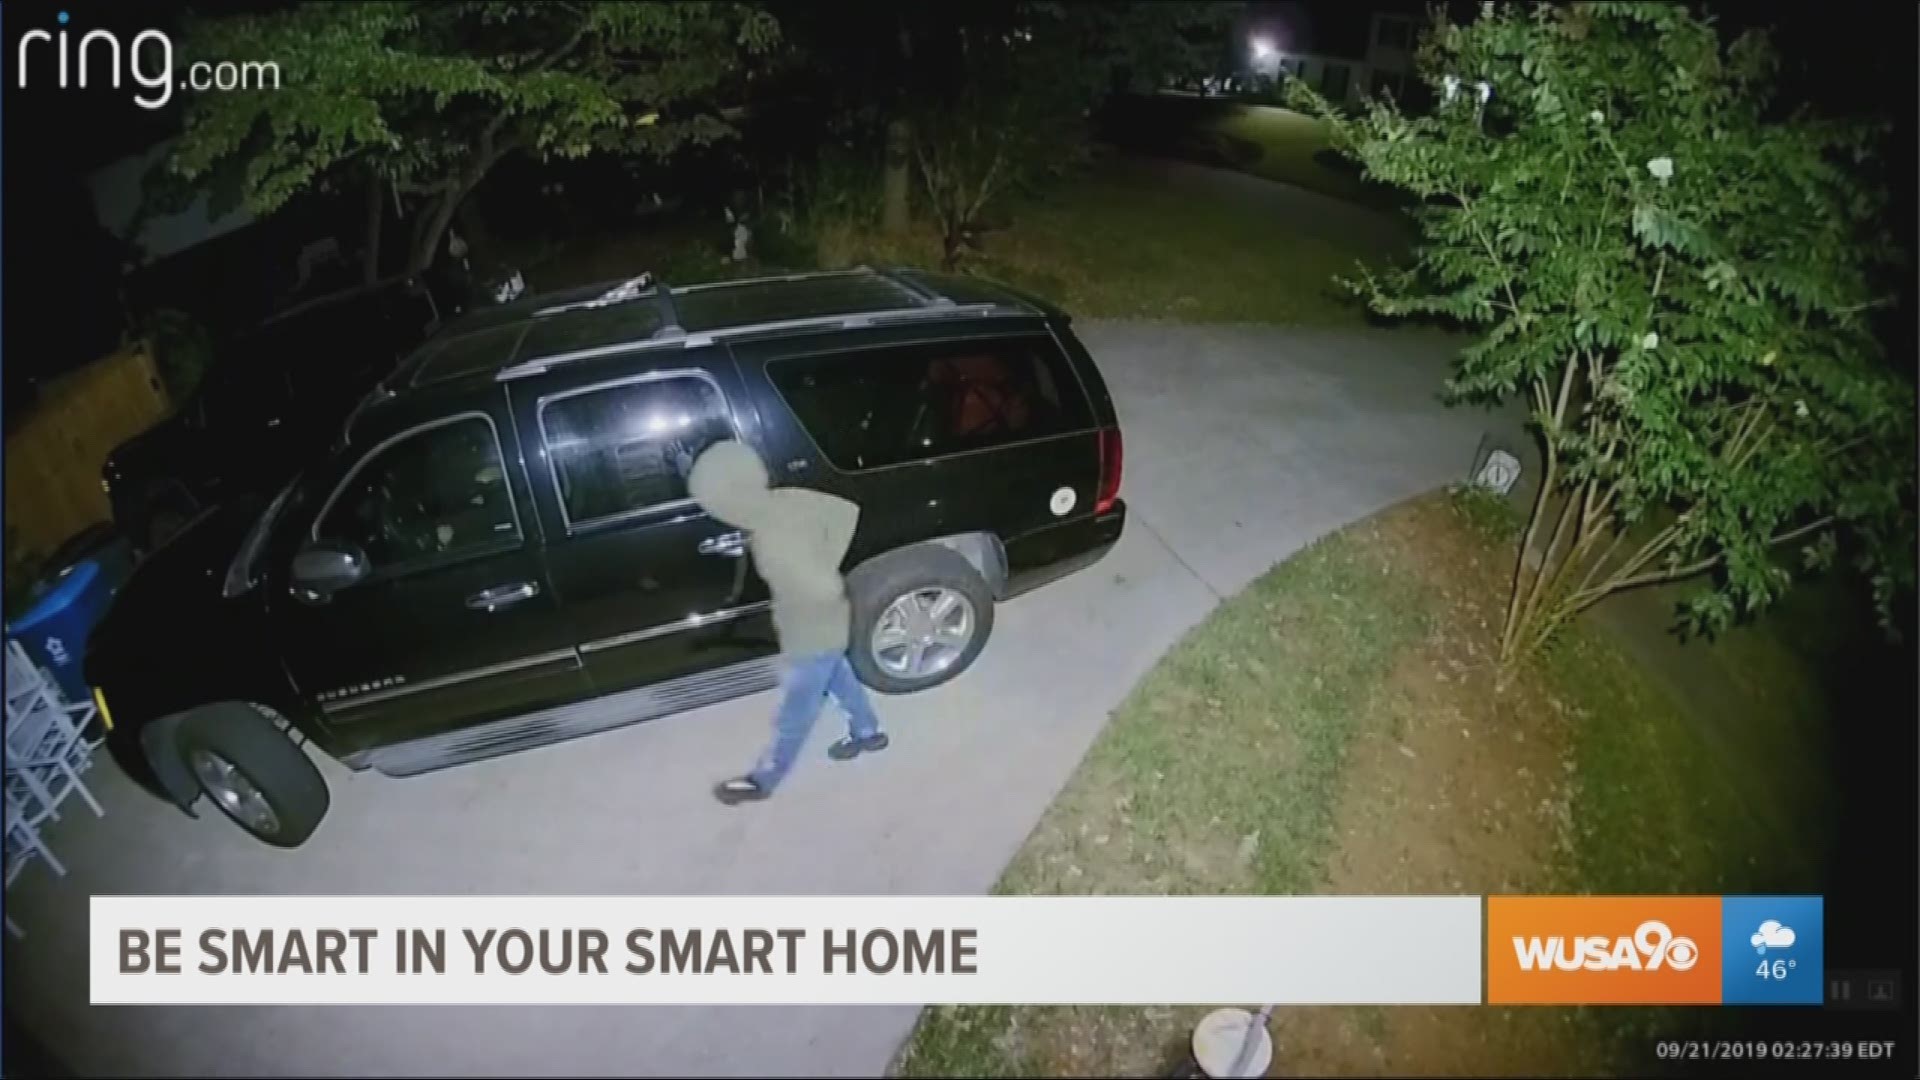 Smart devices for your home can make your life easier but they can also leave you vulnerable. Cyber expert Will Nobles has some tips to keep you safe.